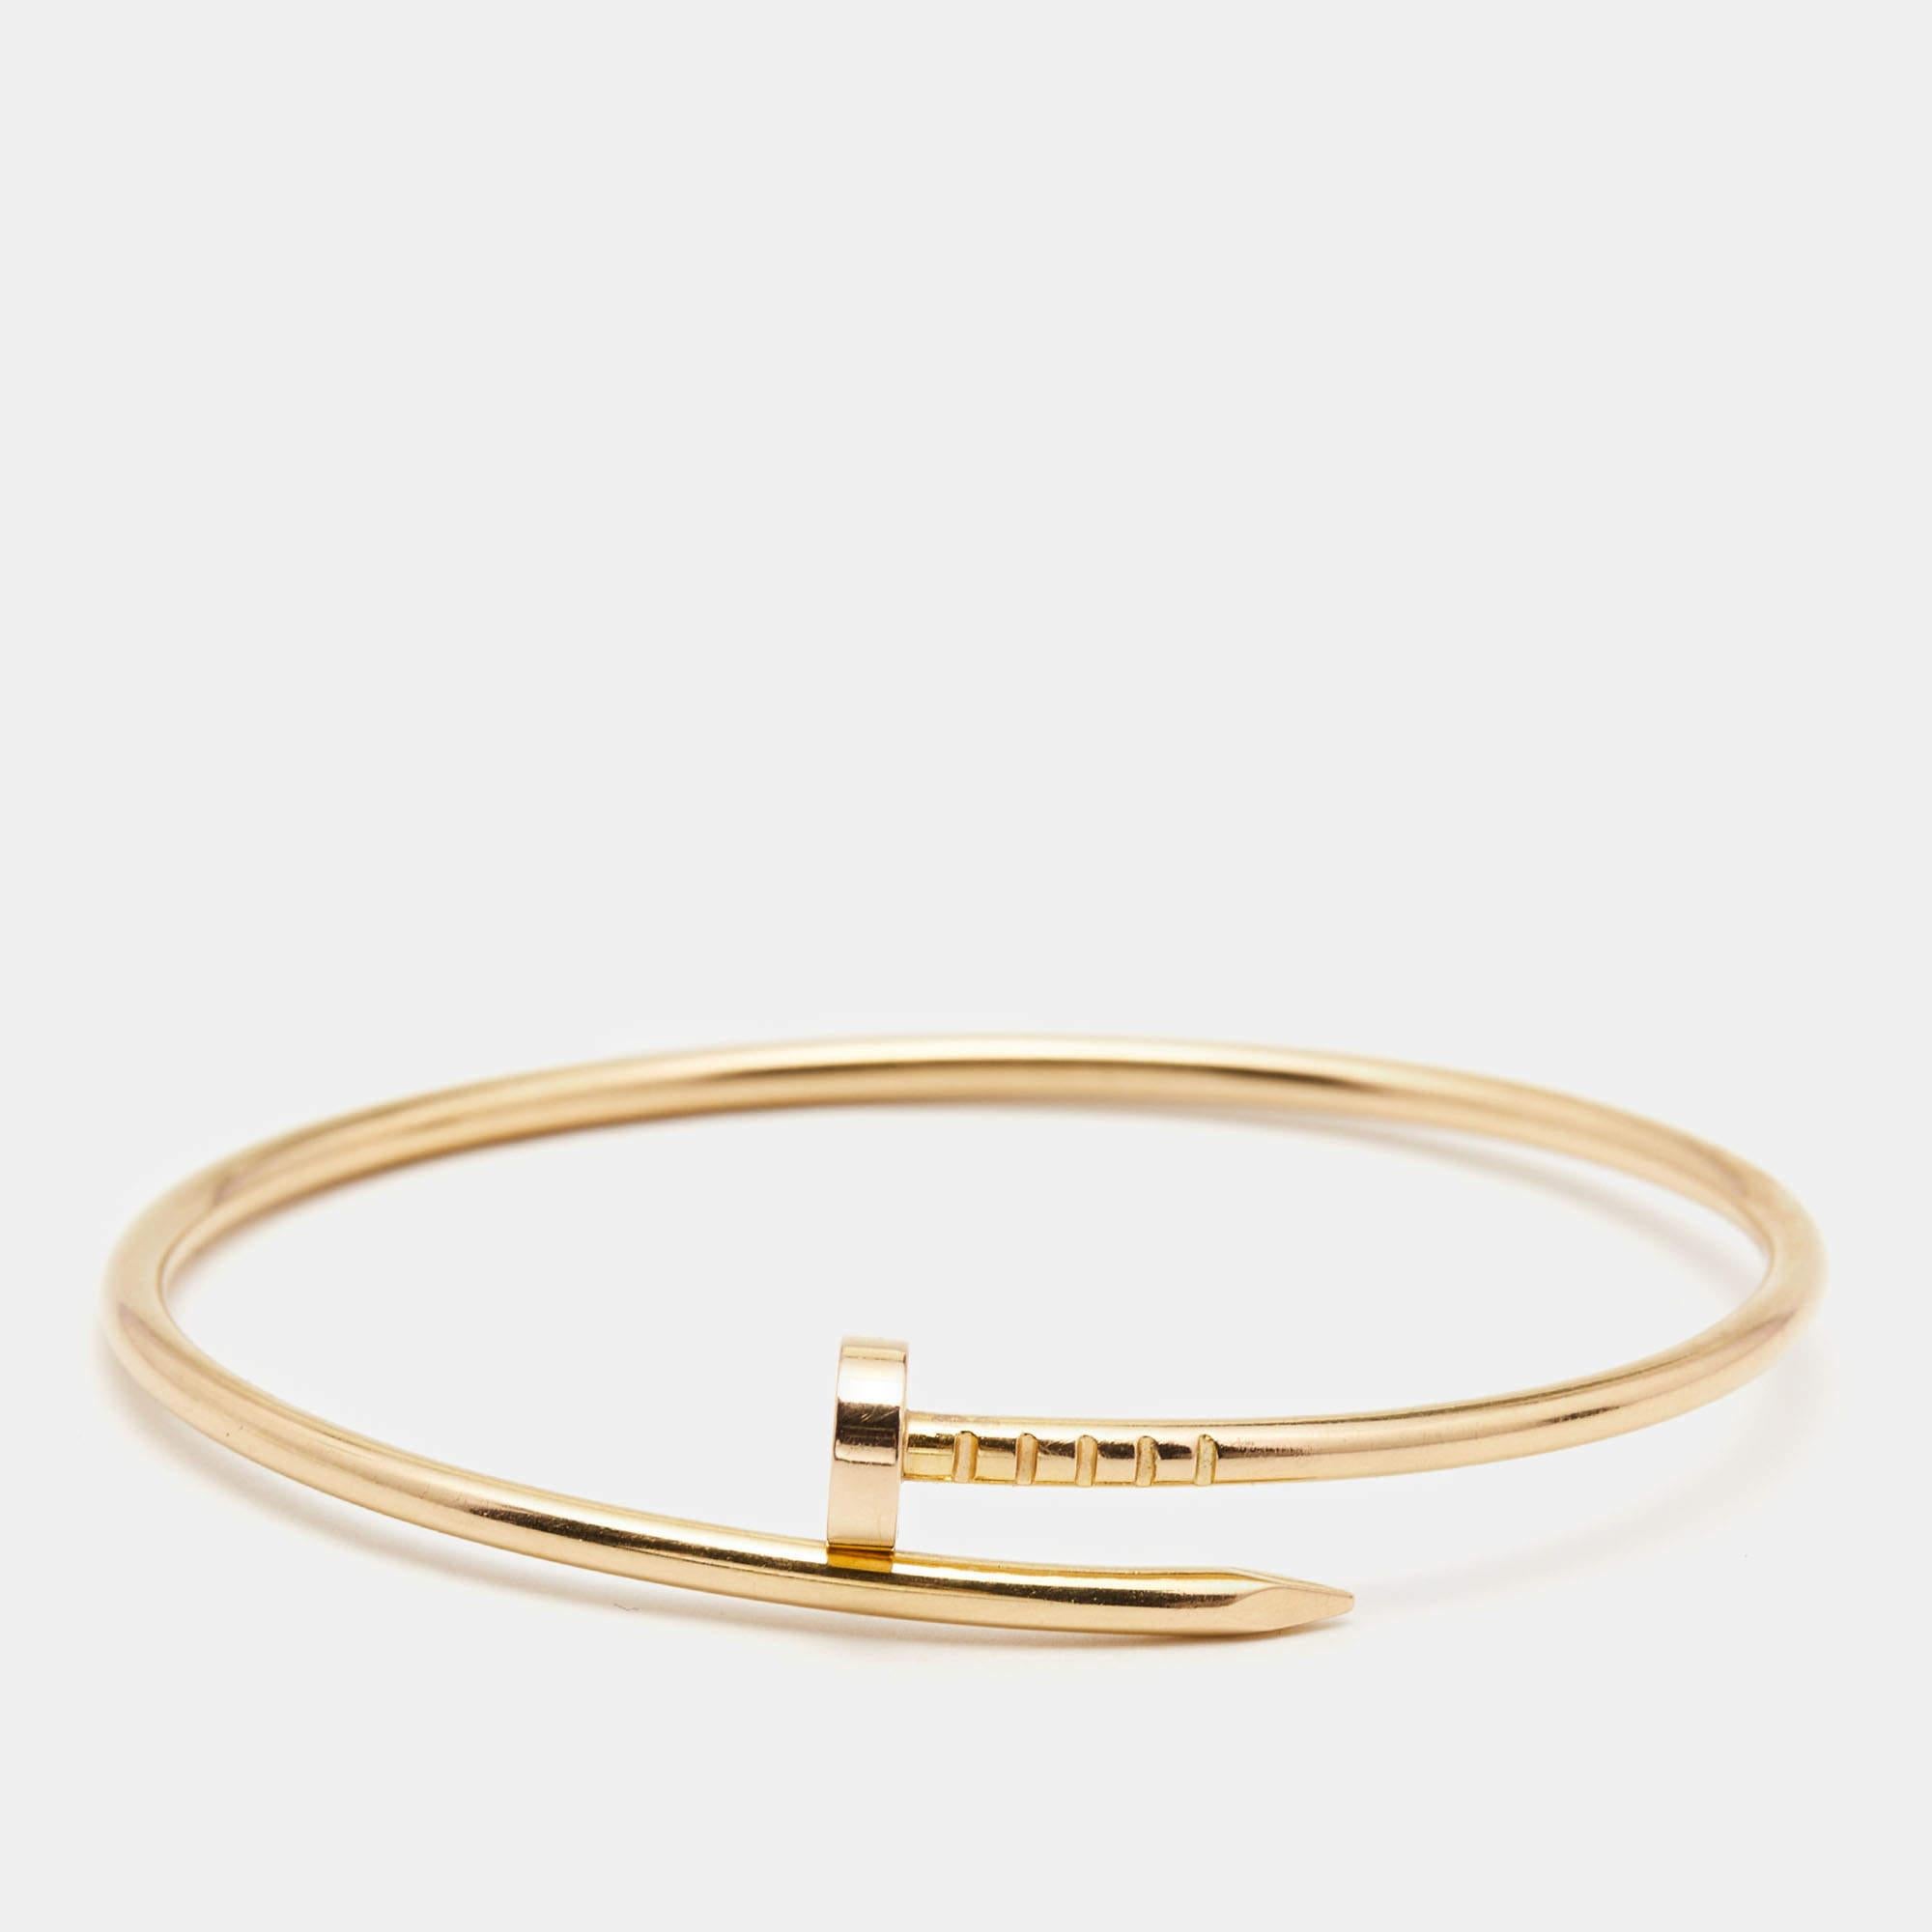 The Cartier Juste Un Clou bracelet is a stunning jewelry piece that epitomizes modern luxury. Crafted from exquisite 18k rose gold, this bracelet features a sleek and minimalist nail design, paying homage to the iconic Cartier nail bracelet. Its